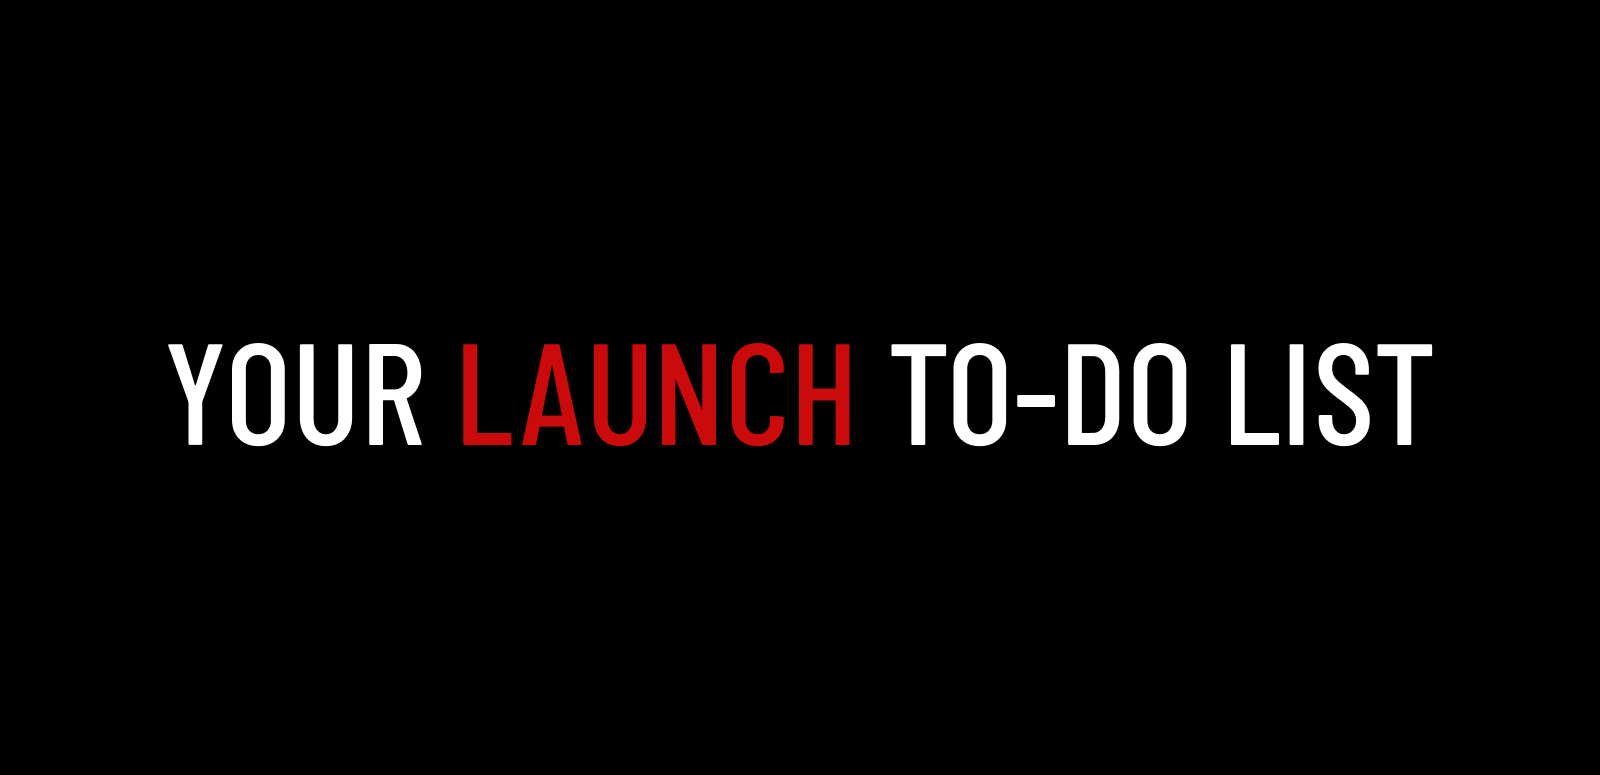 Your Launch To-Do List